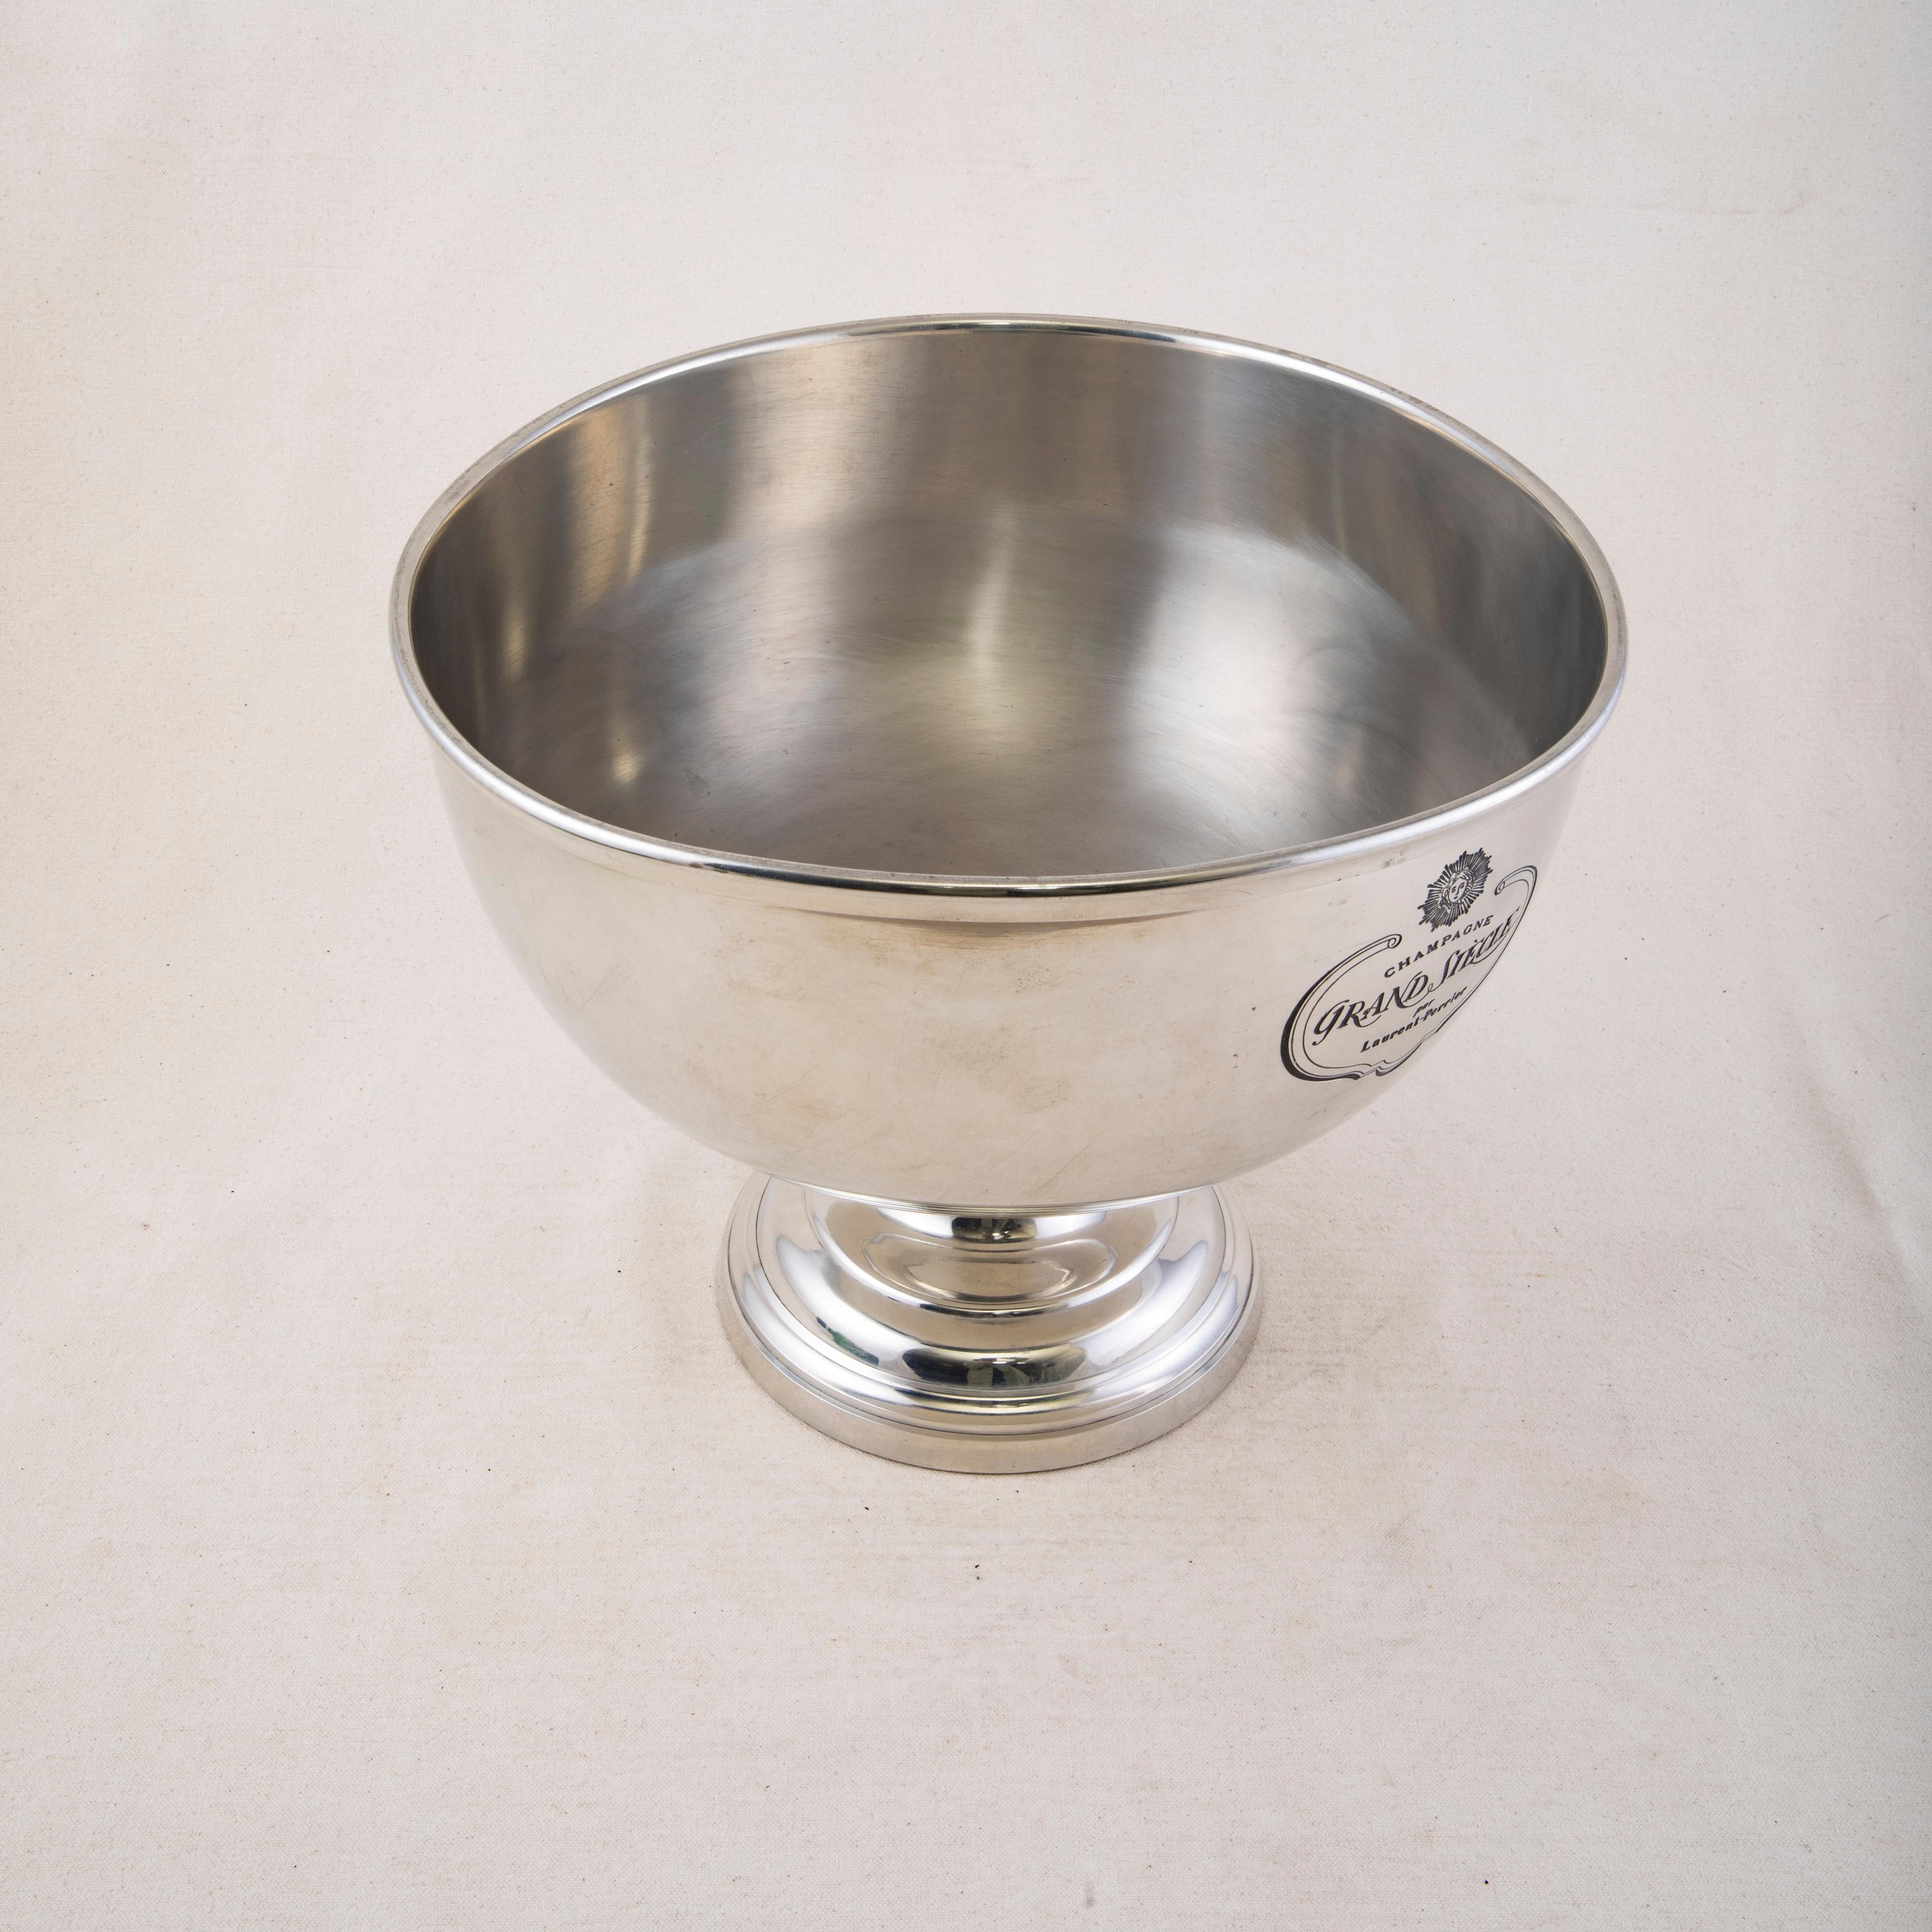 This mid twentieth century French silver plate over pewter hotel champagne bucket or wine chiller is engraved with the name of the champagne Grand Siecle par Laurent Perrier or by Laurent Perrier. Above the name is the head of Apollo the Greek god